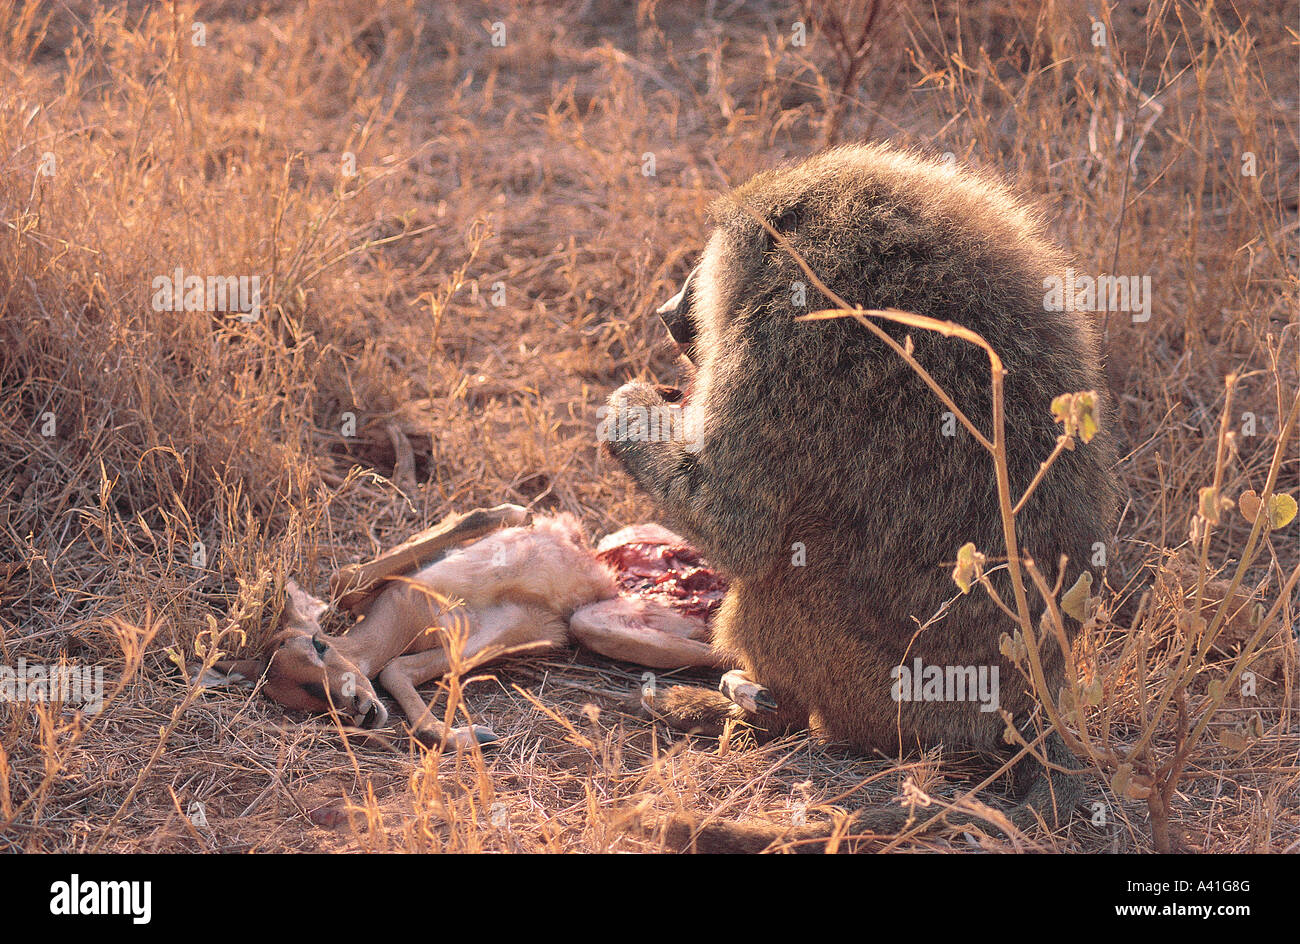 Olive Baboon feeding on the carcass of a baby Impala which it has just caught in Samburu National Reserve Kenya East Africa Stock Photo